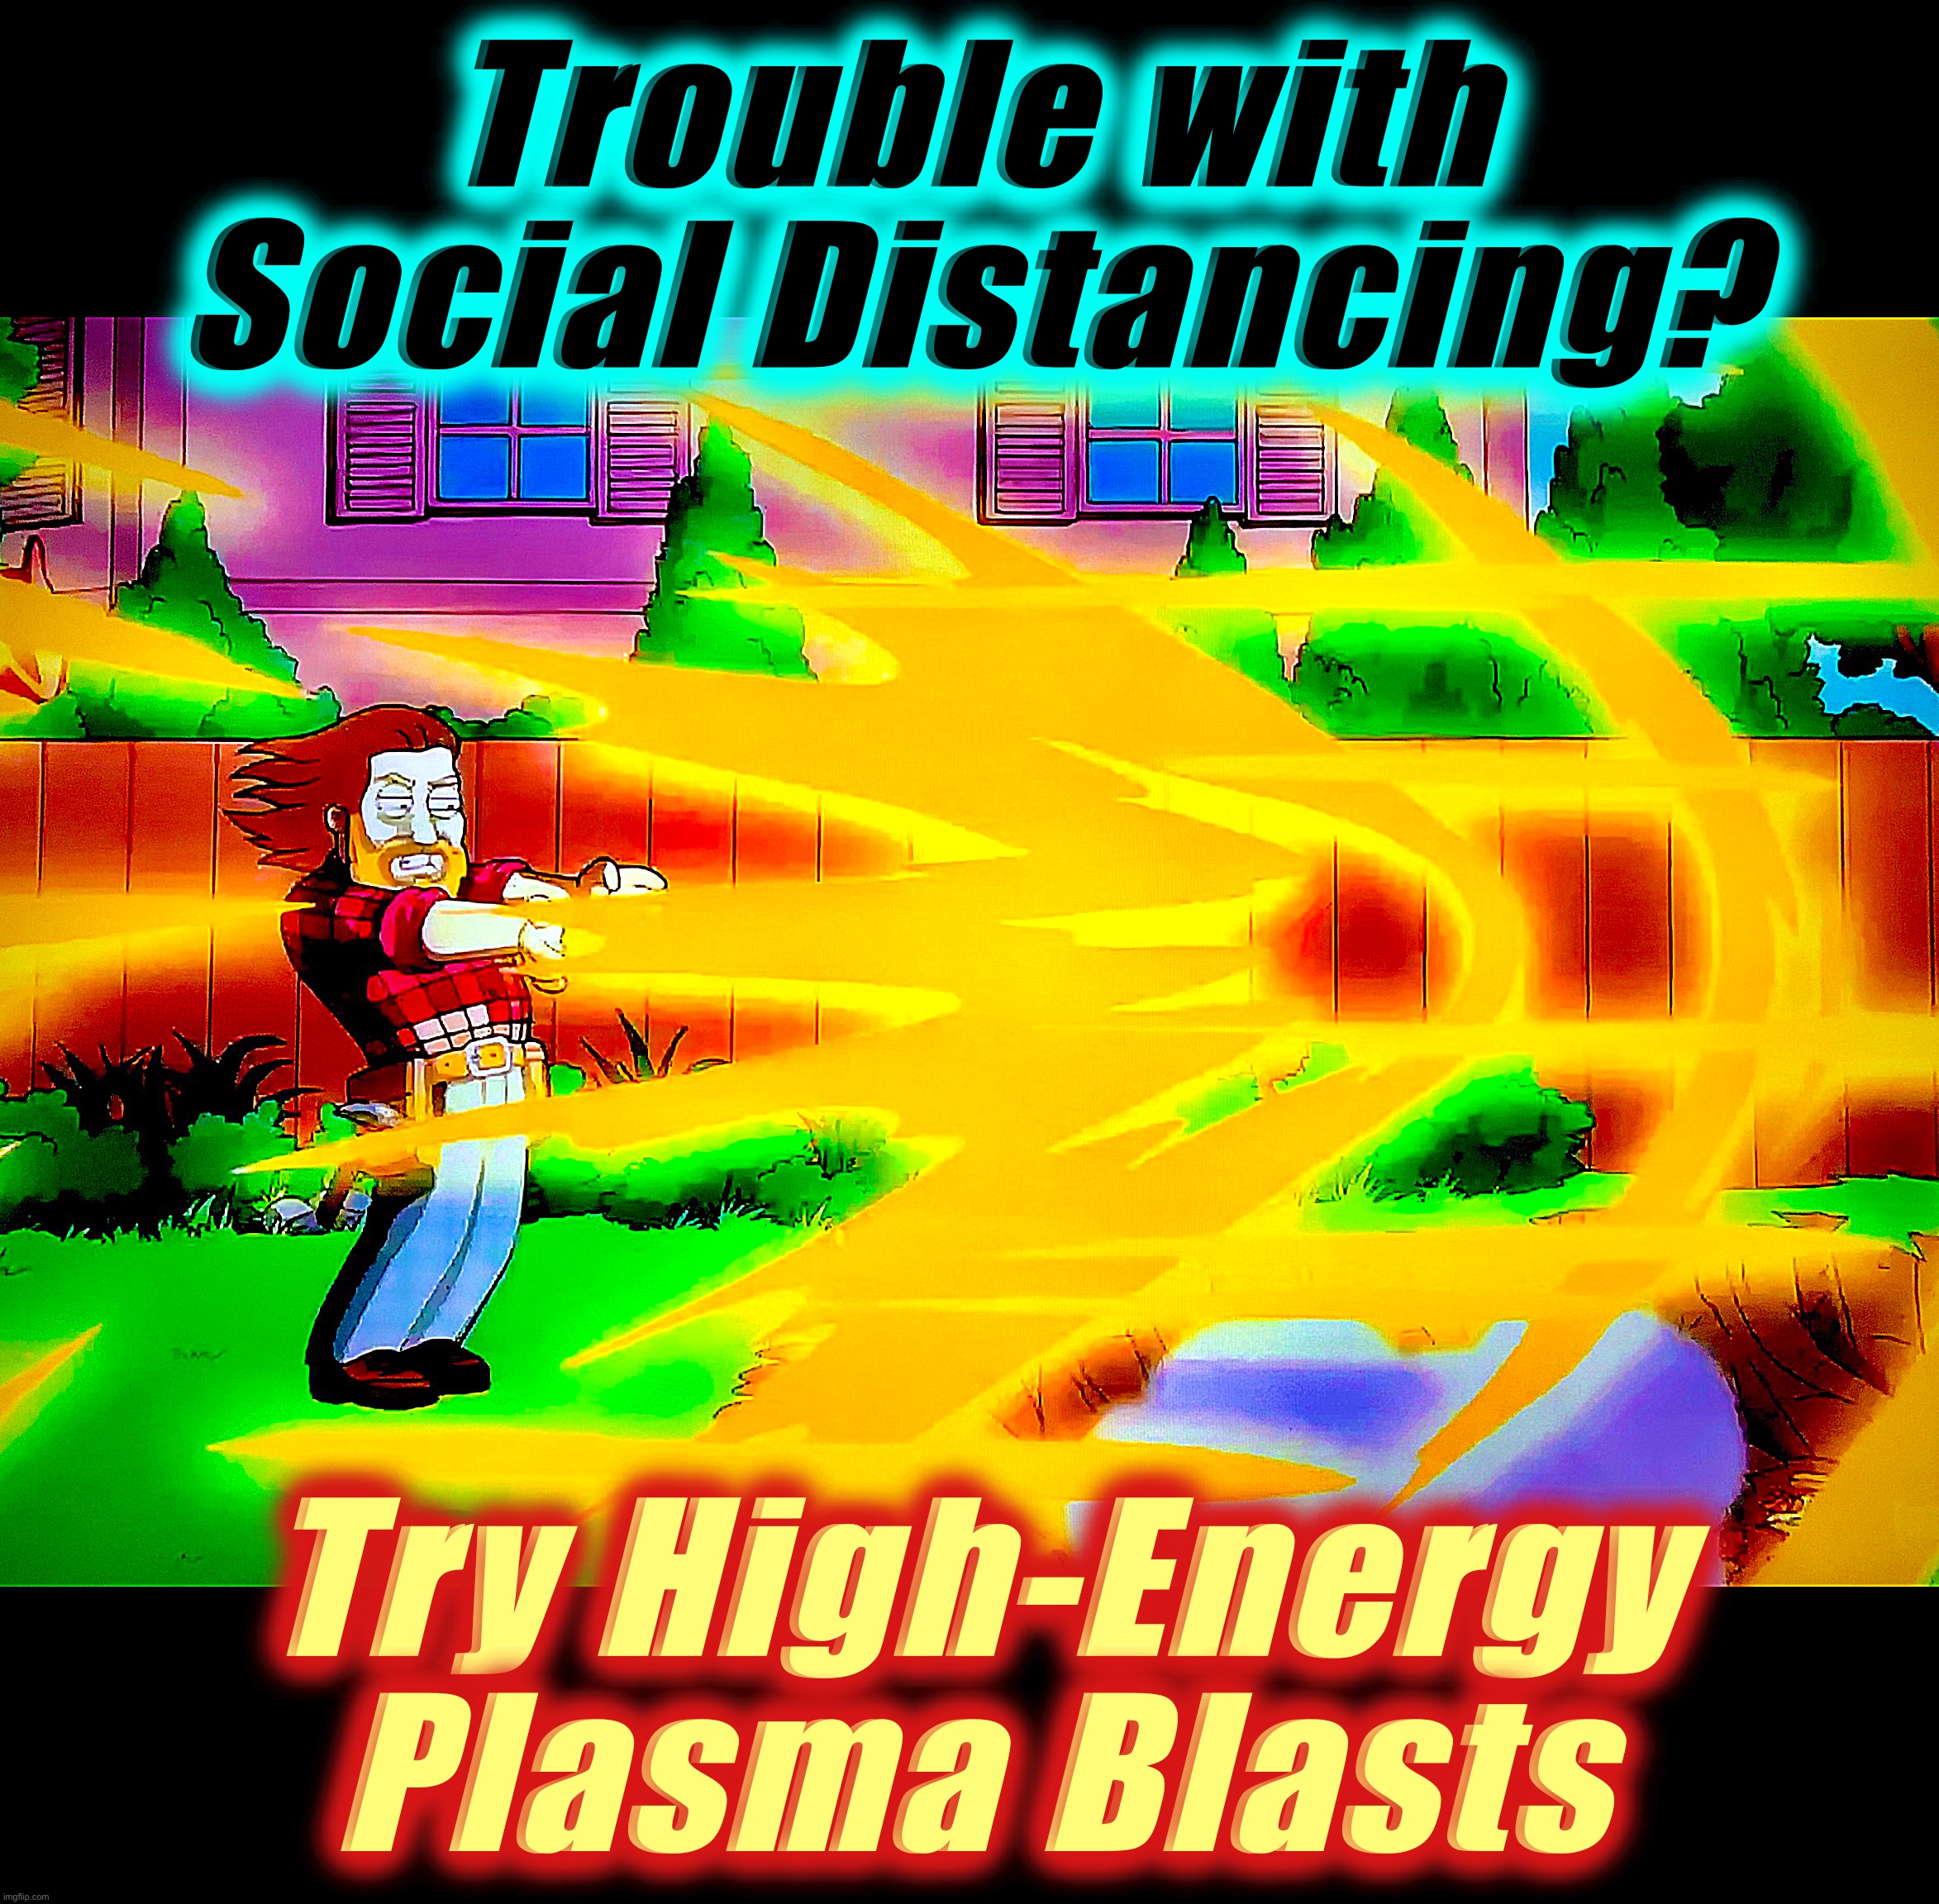 Vaporize Transgressors | Trouble with
Social Distancing? Try High-Energy
Plasma Blasts | image tagged in social distancing,memes,kill it with fire,so anyway i started blasting,covid-19,world war c | made w/ Imgflip meme maker